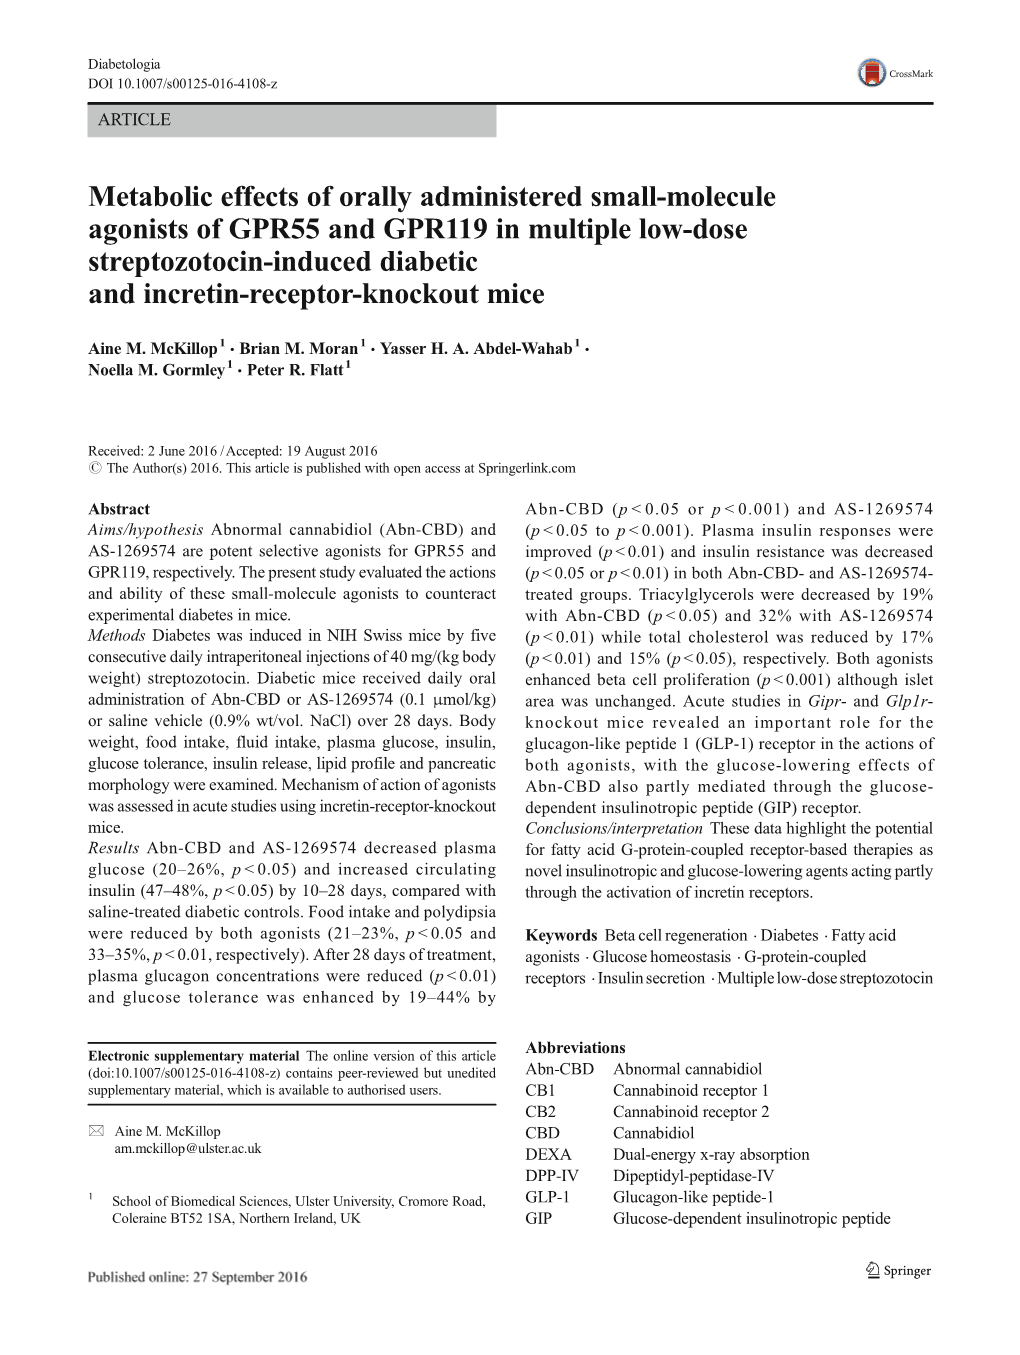 Metabolic Effects of Orally Administered Small-Molecule